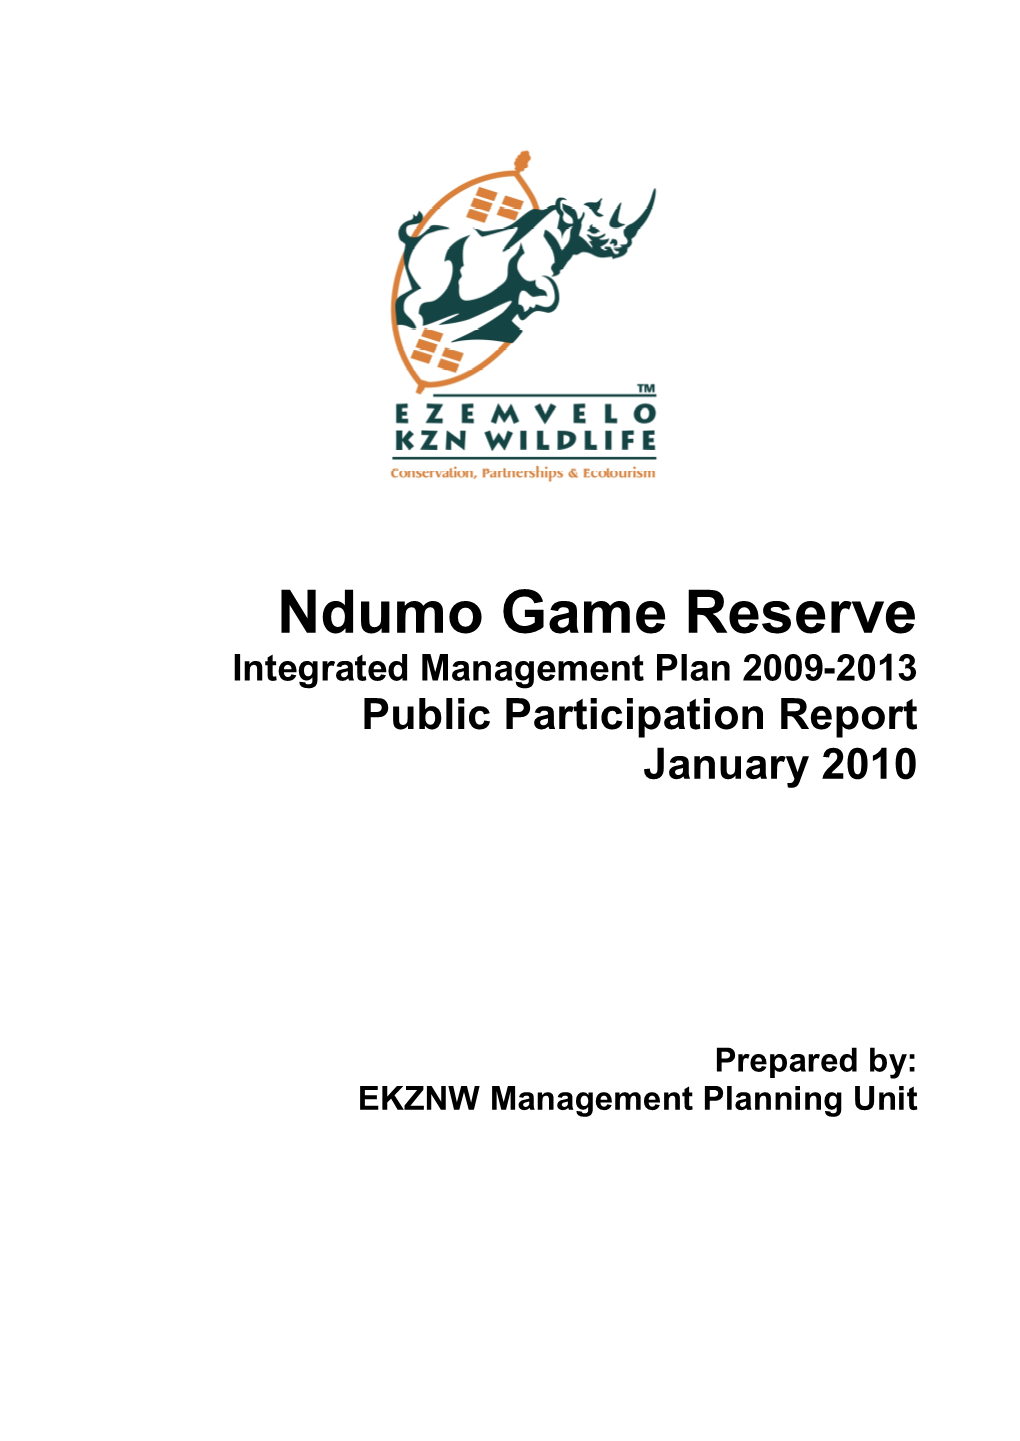 Ndumo Game Reserve Integrated Management Plan 2009-2013 Public Participation Report January 2010